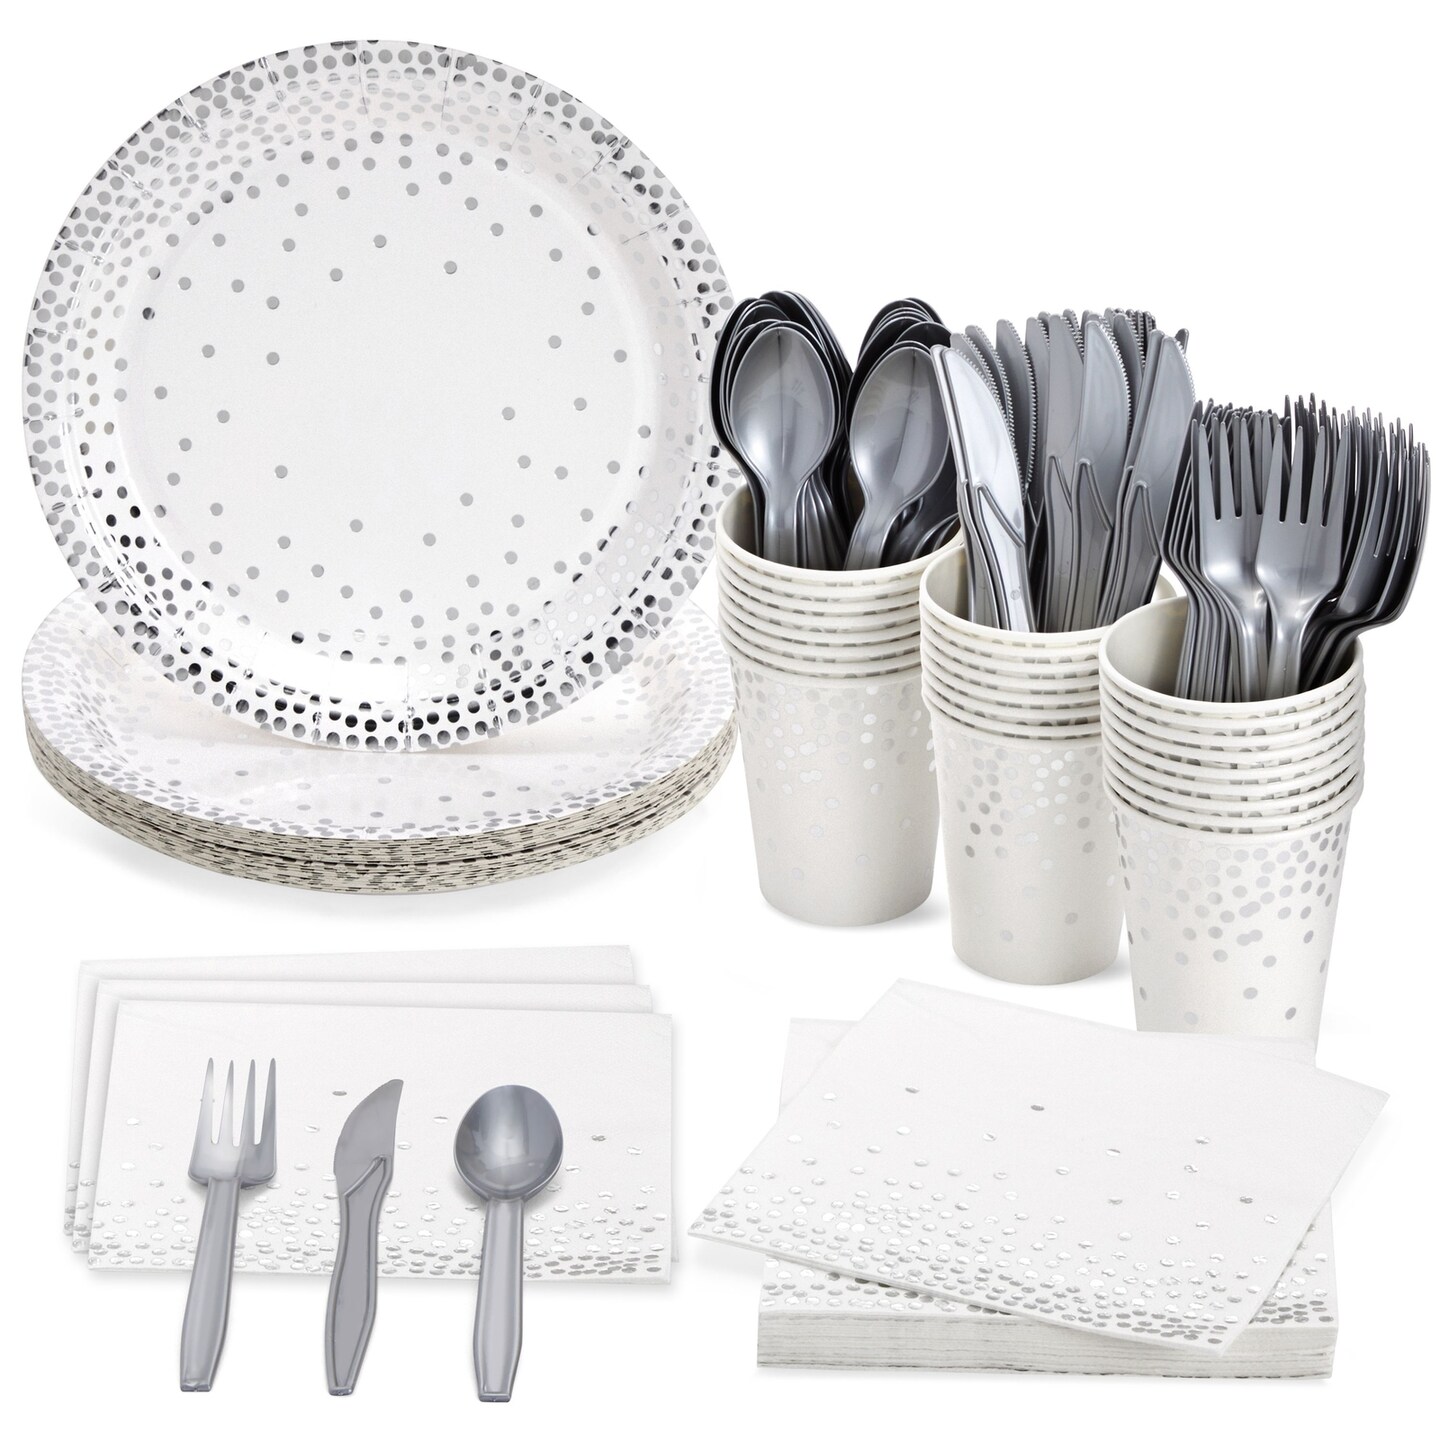 144 Piece Silver Party Supplies for Wedding, Birthday - Silver Table Decorations with Plates, Napkins, Cups, and Cutlery (Serves 24)